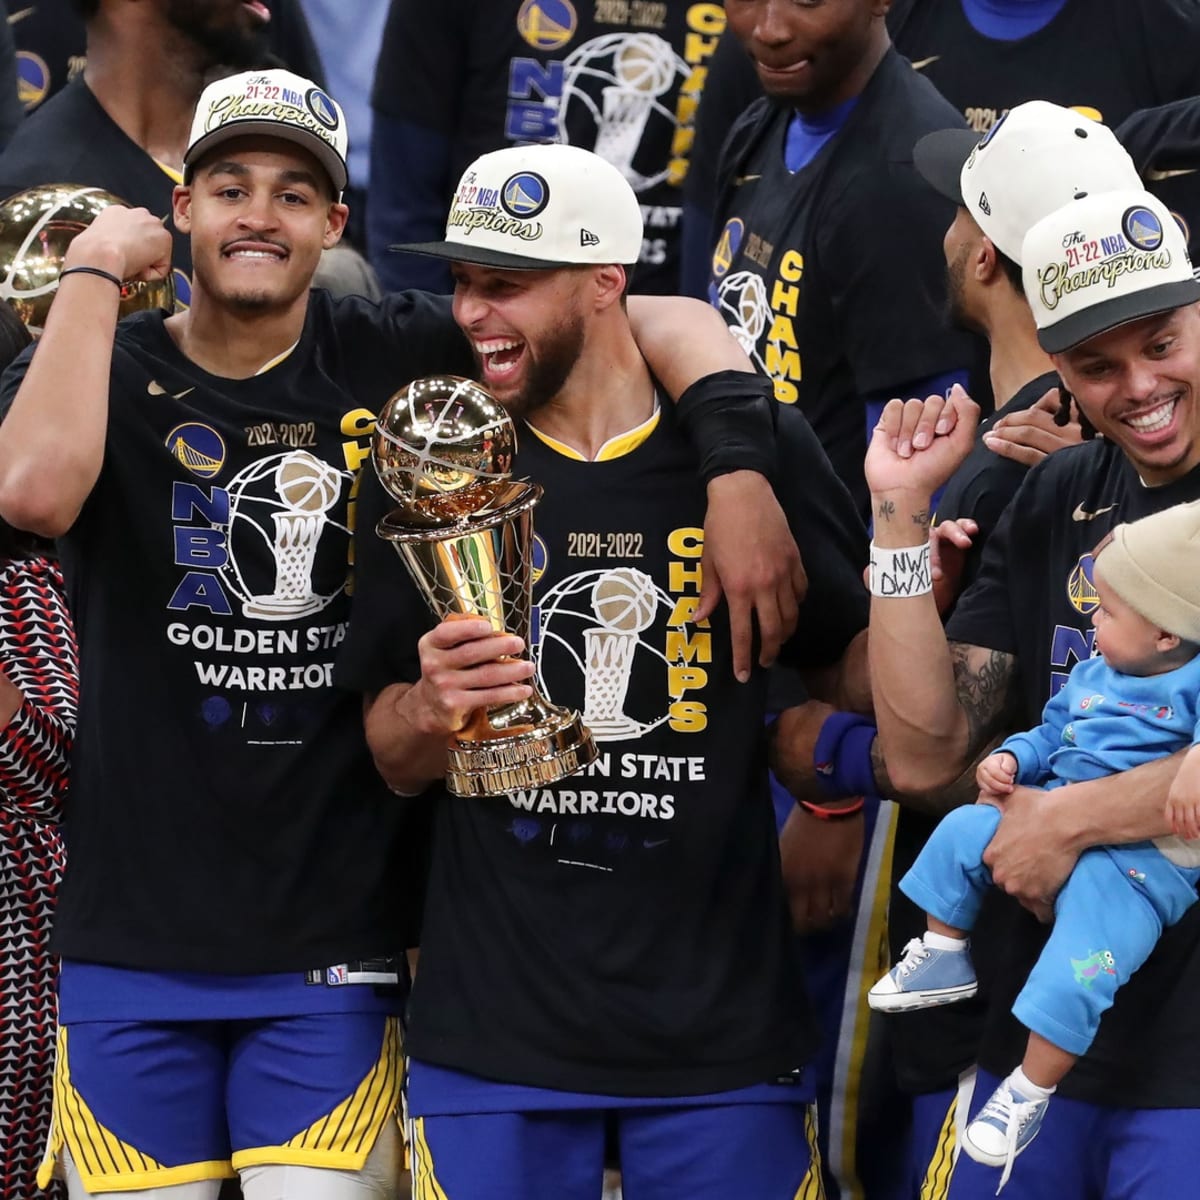 Stephen Curry's Rings - How many rings does Stephen Curry have?